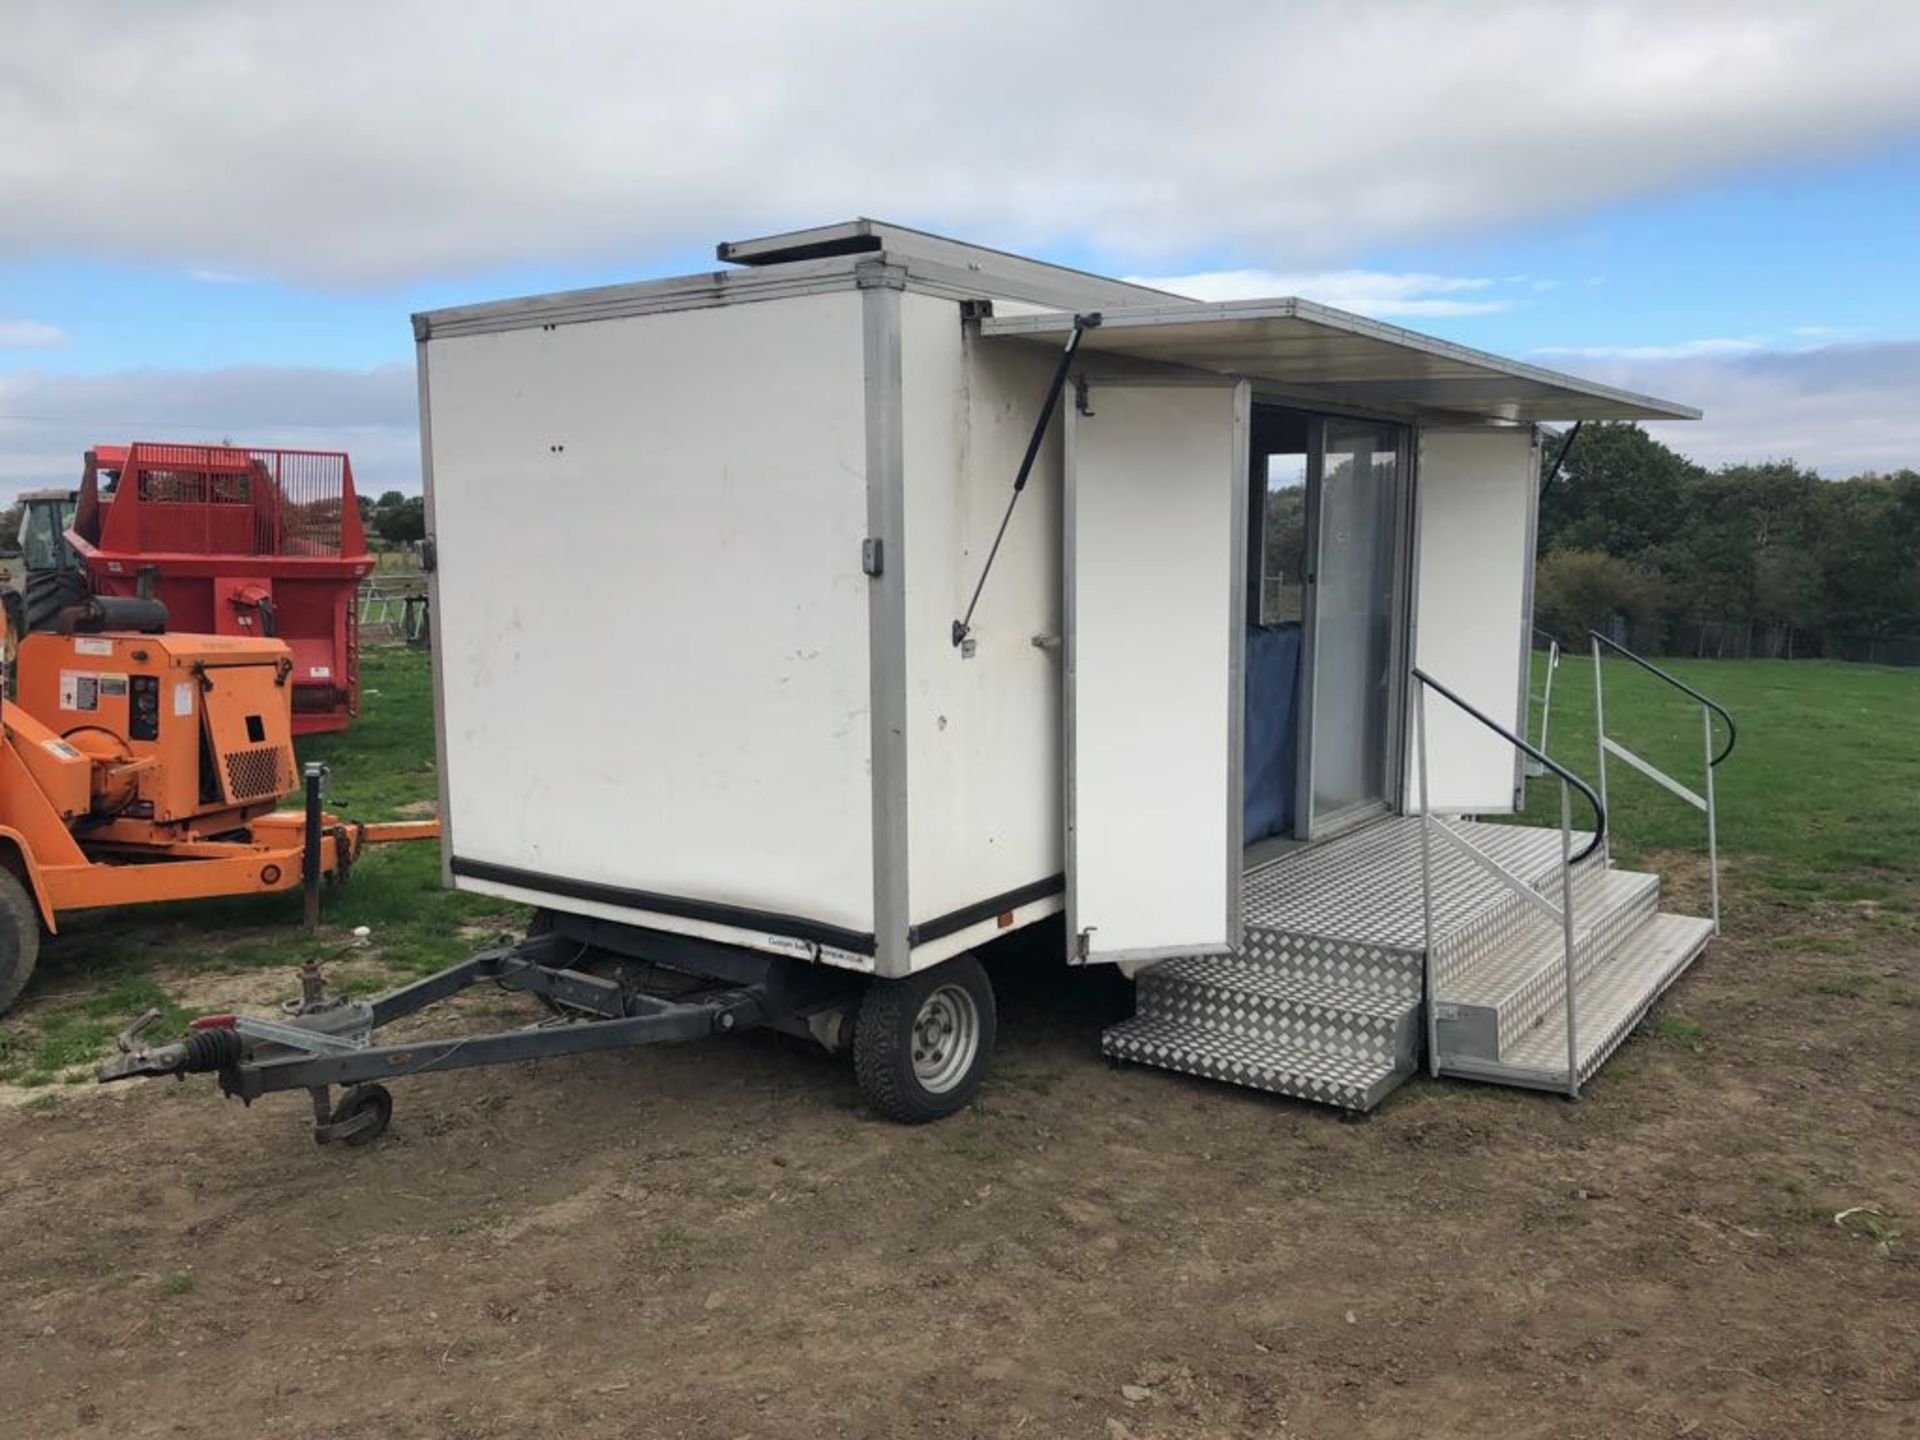 MOBILE OFFICE / EXHIBITION TRAILER C/W RAMPS, STEPS, GENERATOR, MAINS ELECTRIC HOOK UP, KITCHEN ETC - Image 2 of 11